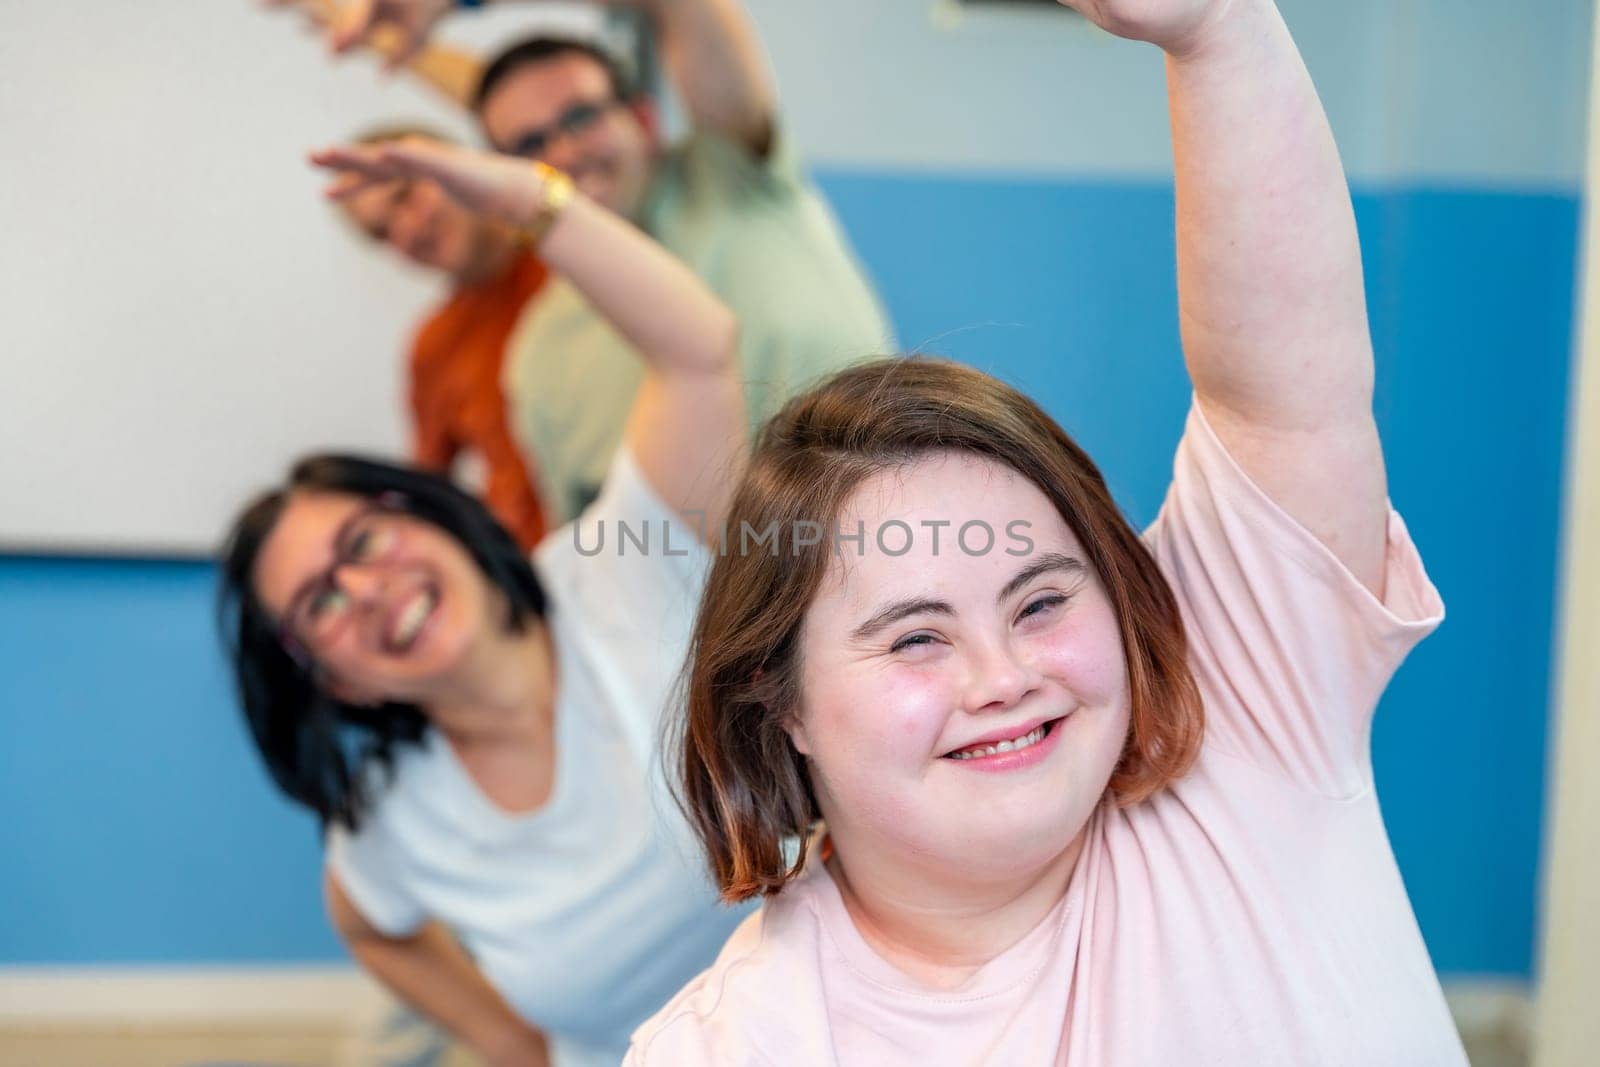 Happy group of people with special needs enjoying gymnastics stretching the back together